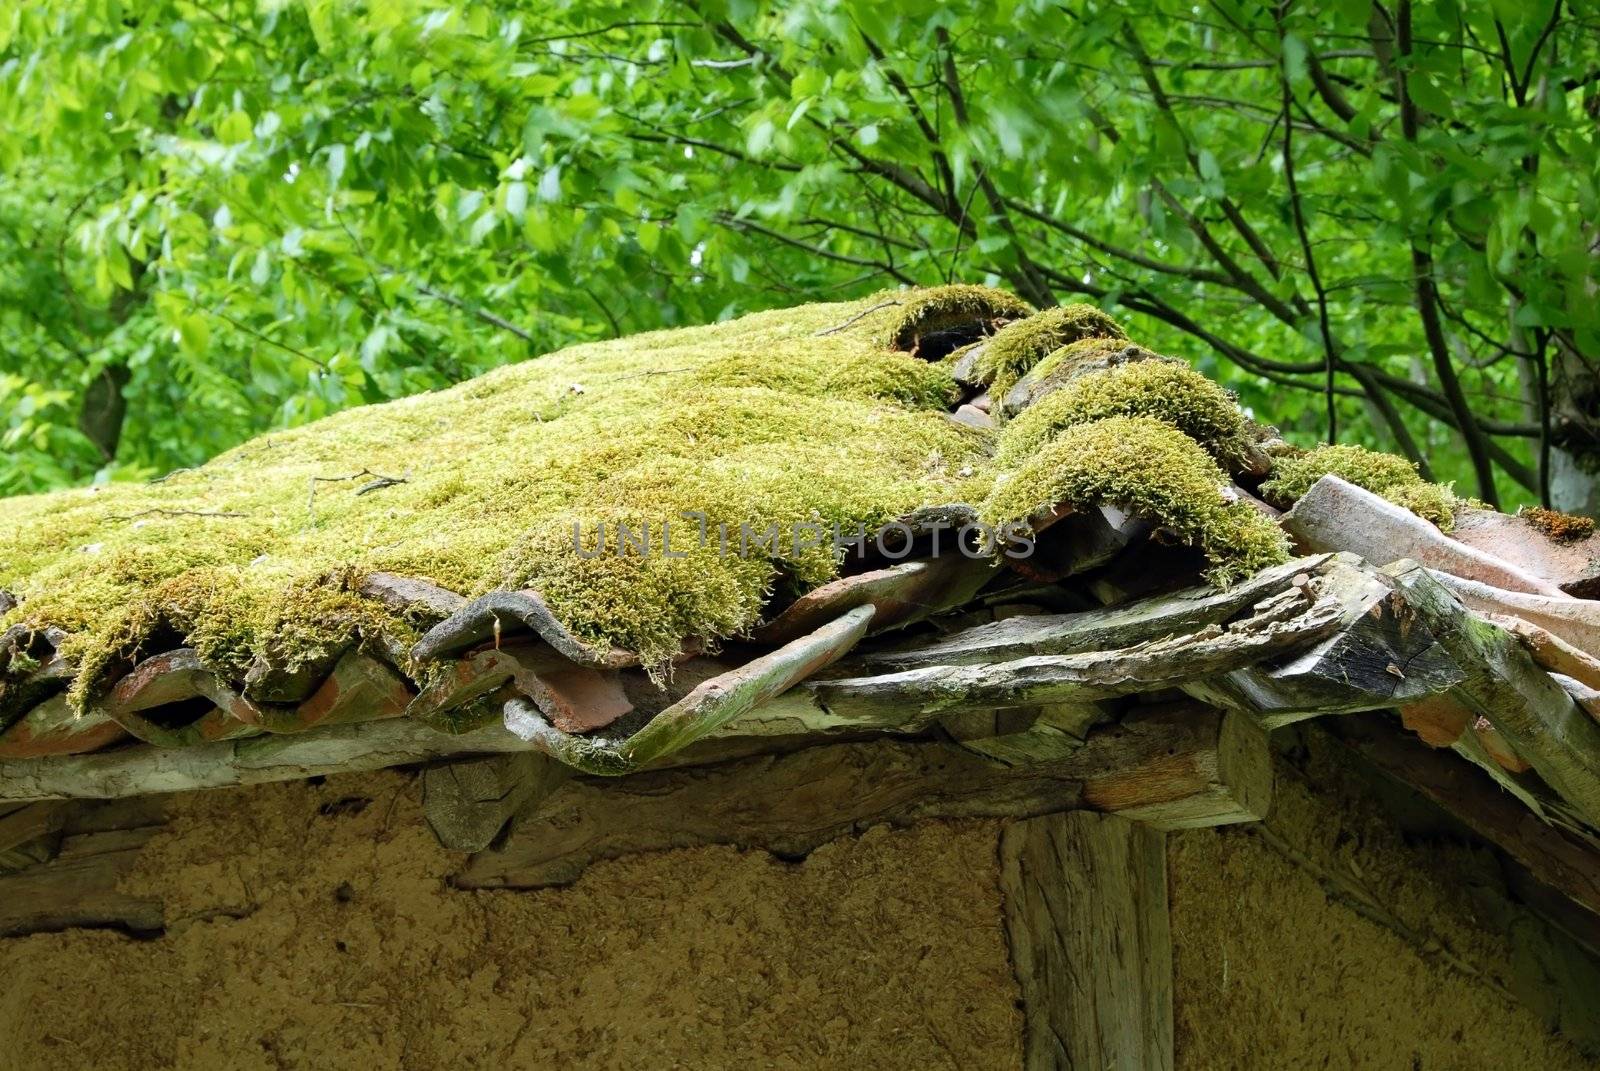 Moss on tiled roof by simply